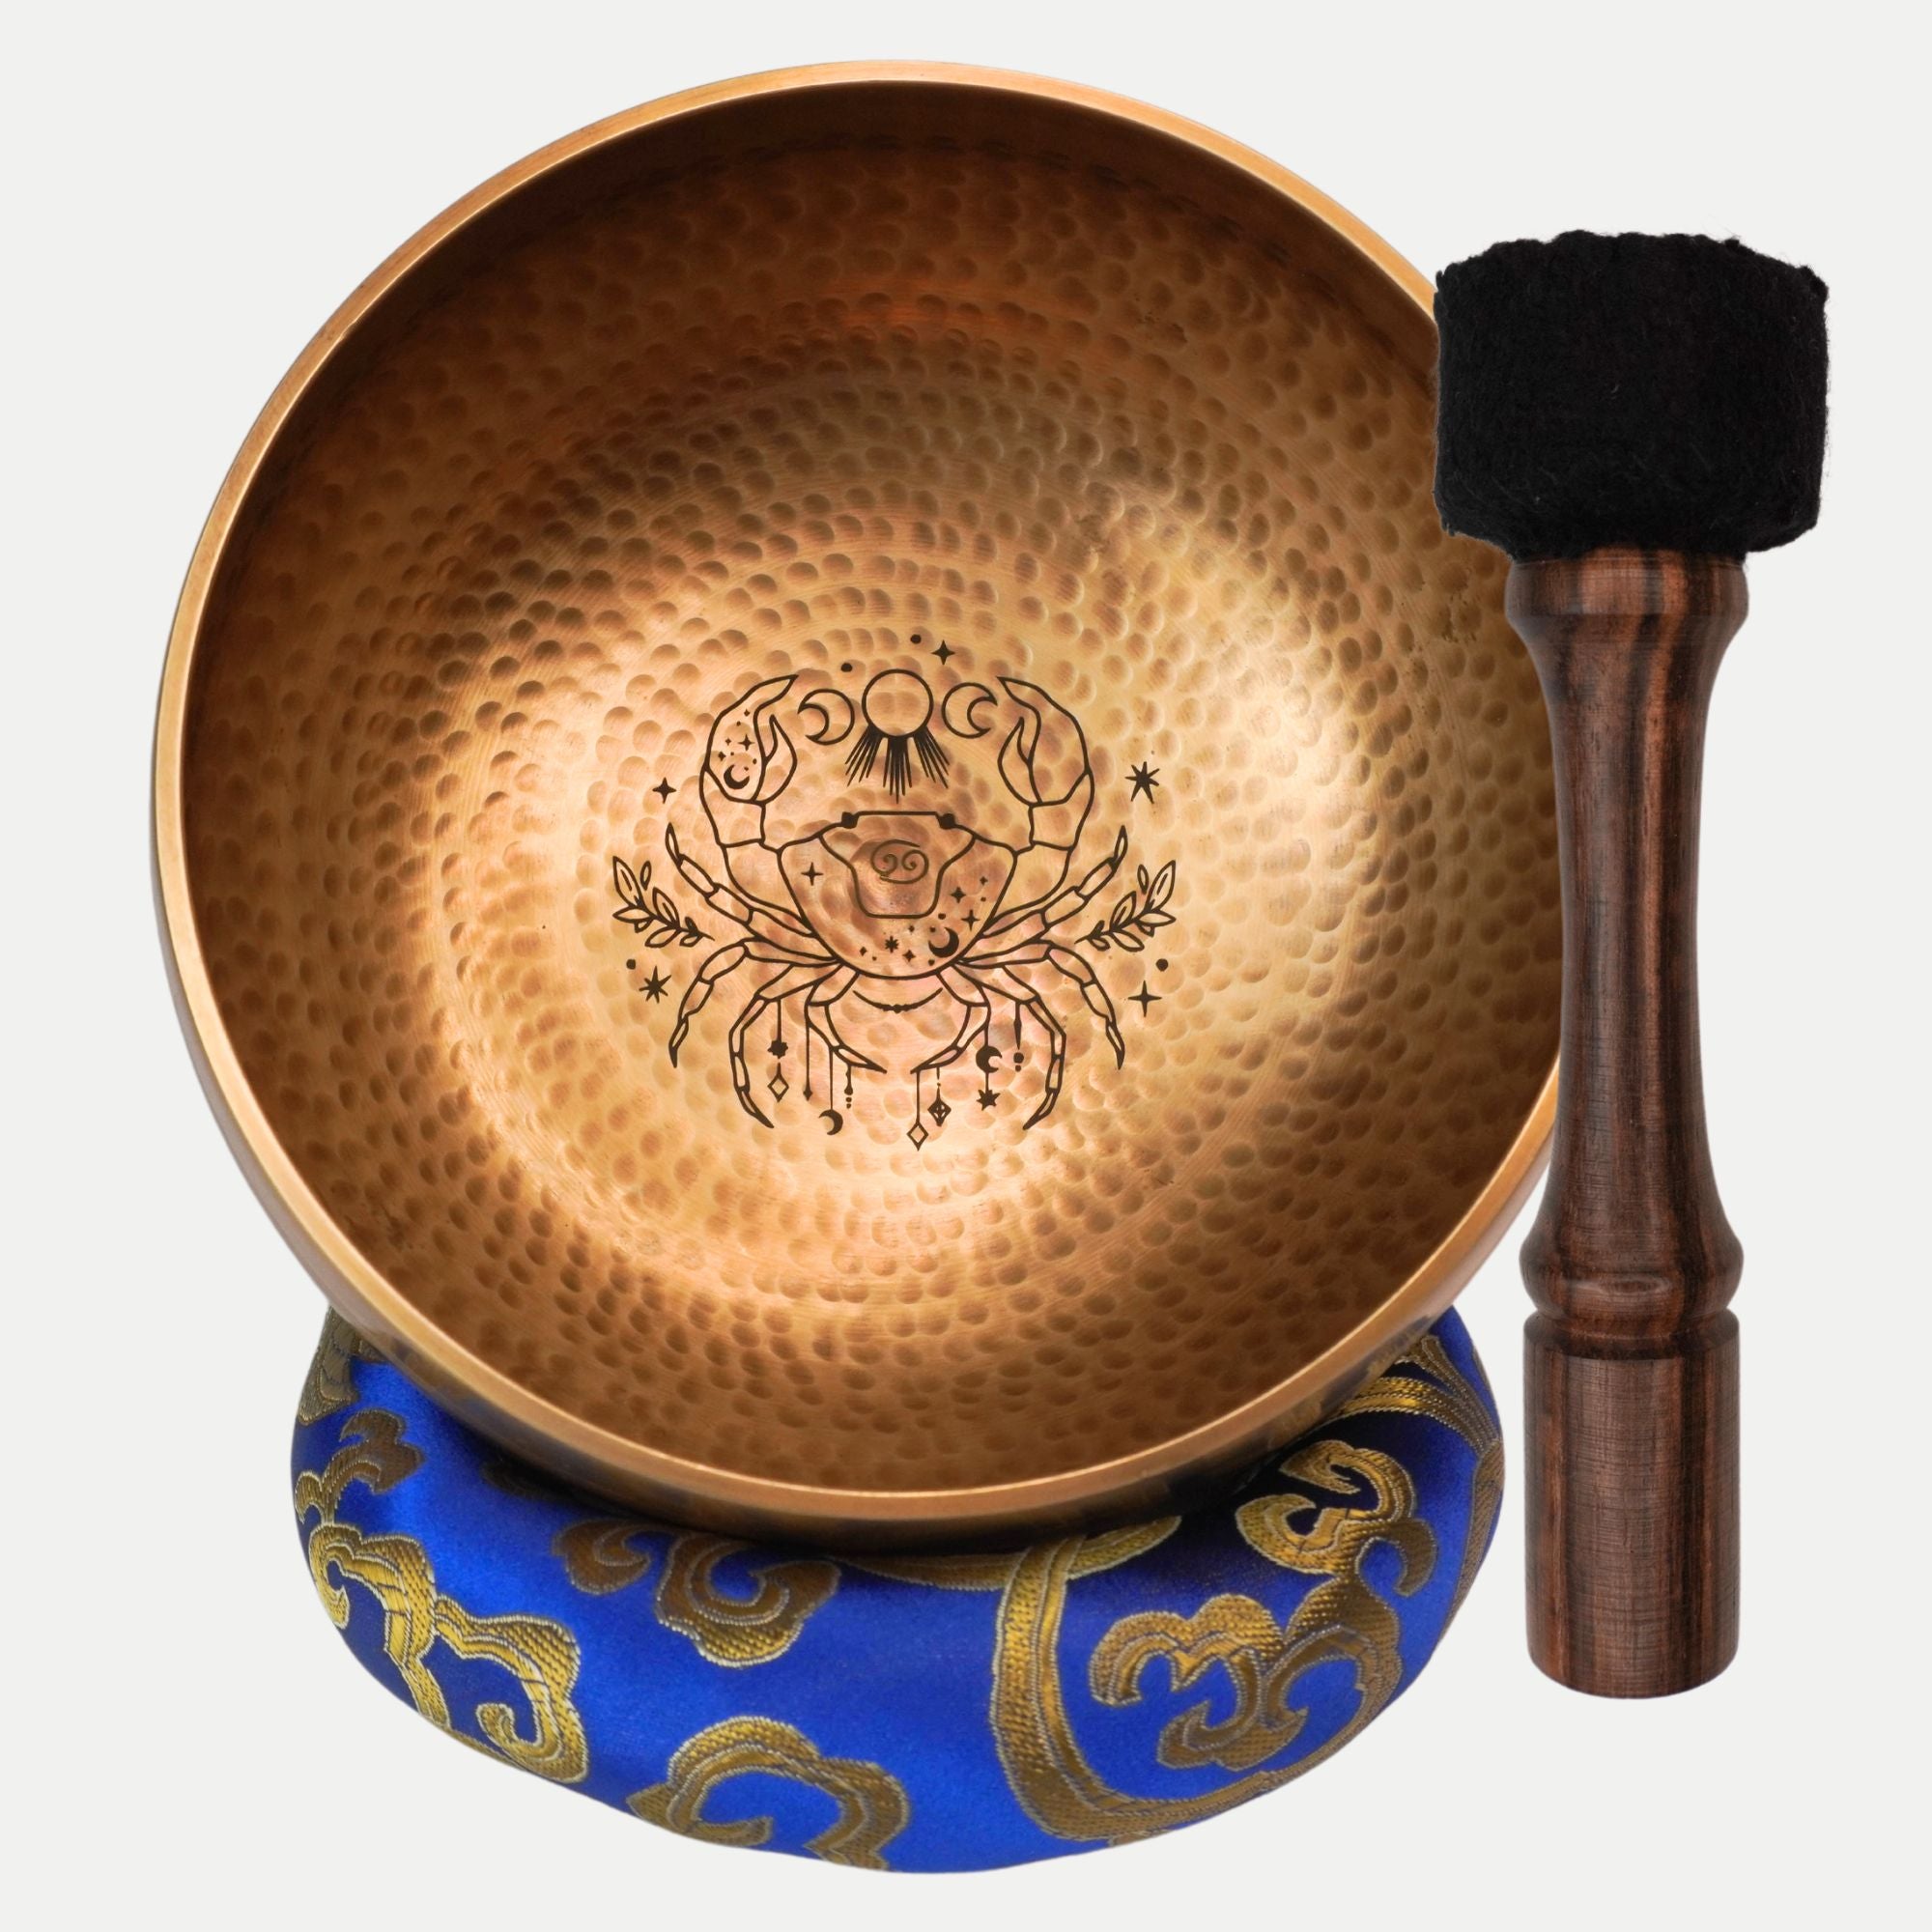 Singing bowl set with your zodiac sign - incl. ring and mallet